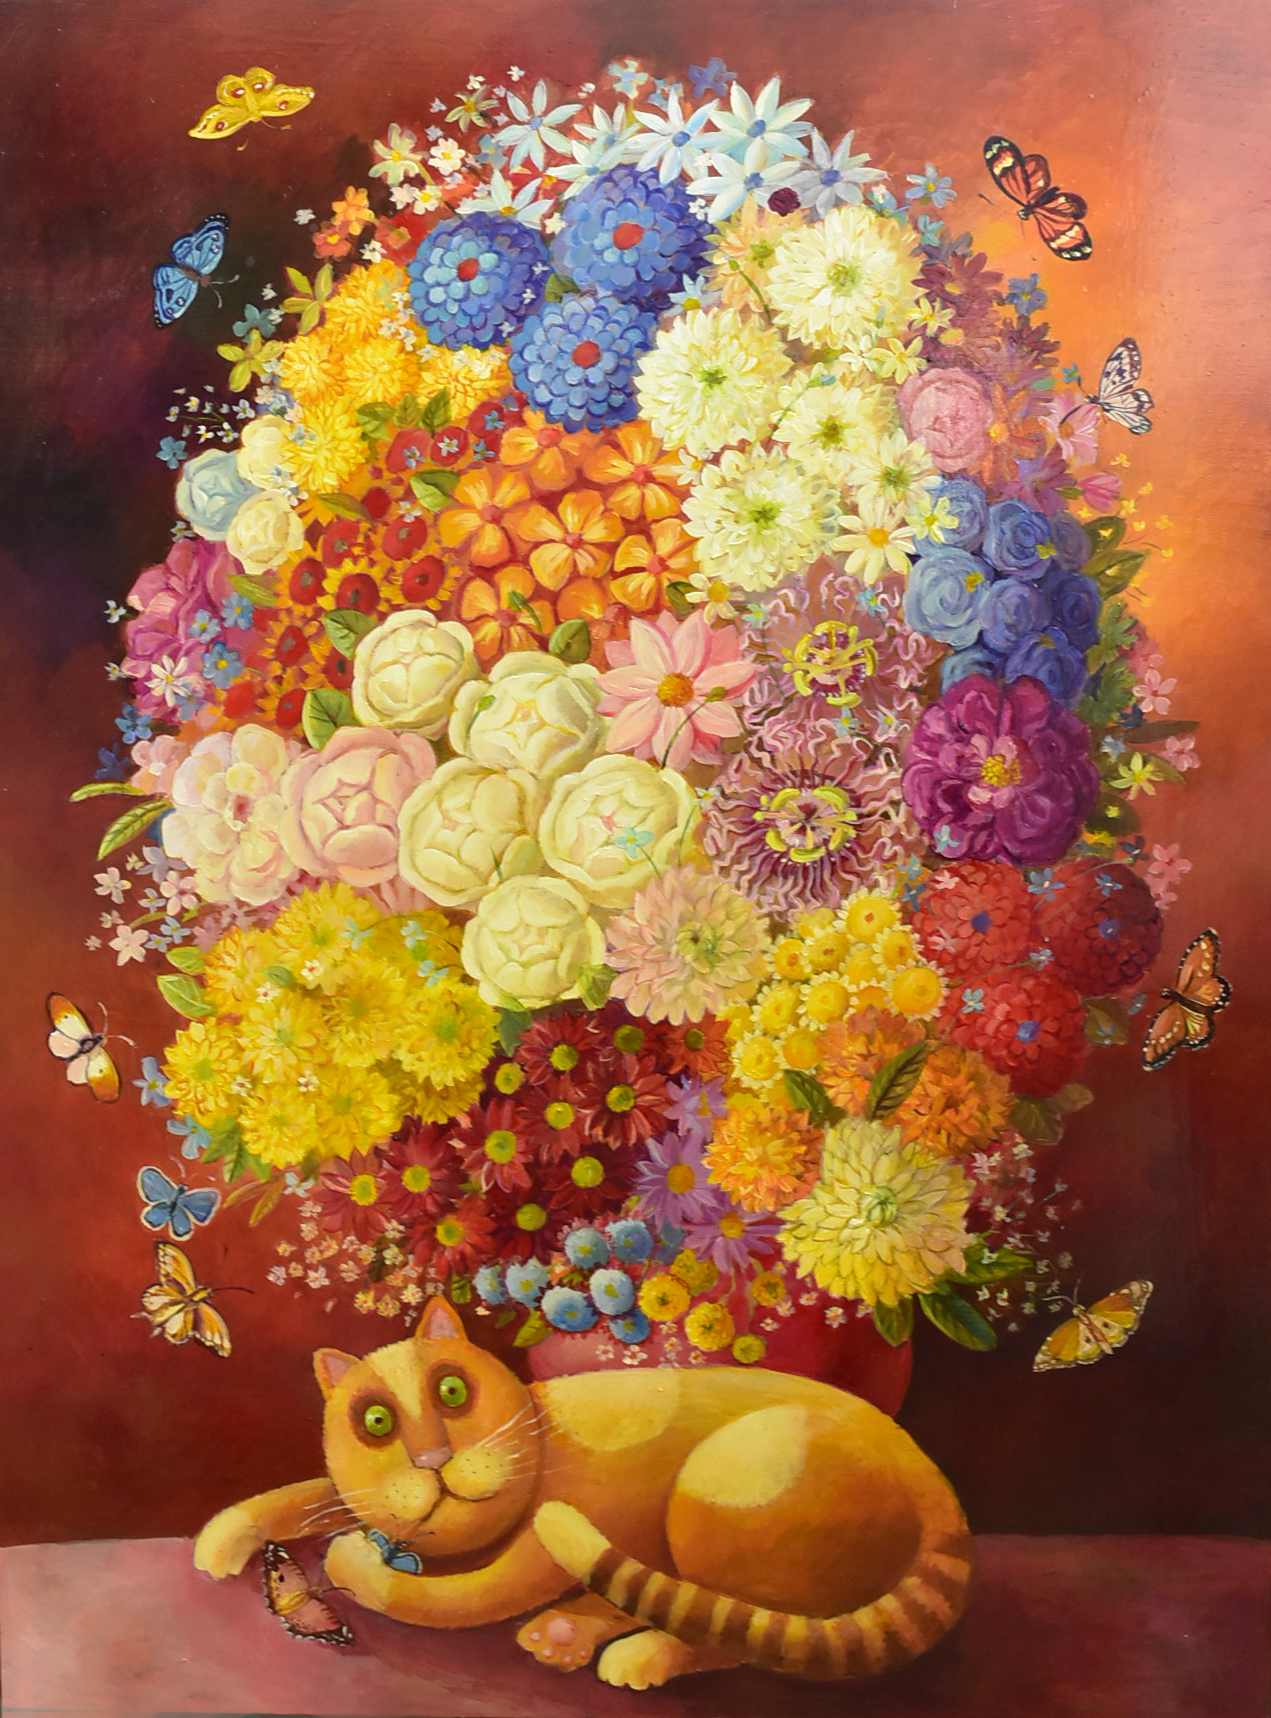 Anna Varella (b. 1971) acrylic on board, 'Floral Still Life with Cat', signed and dated 'Anna